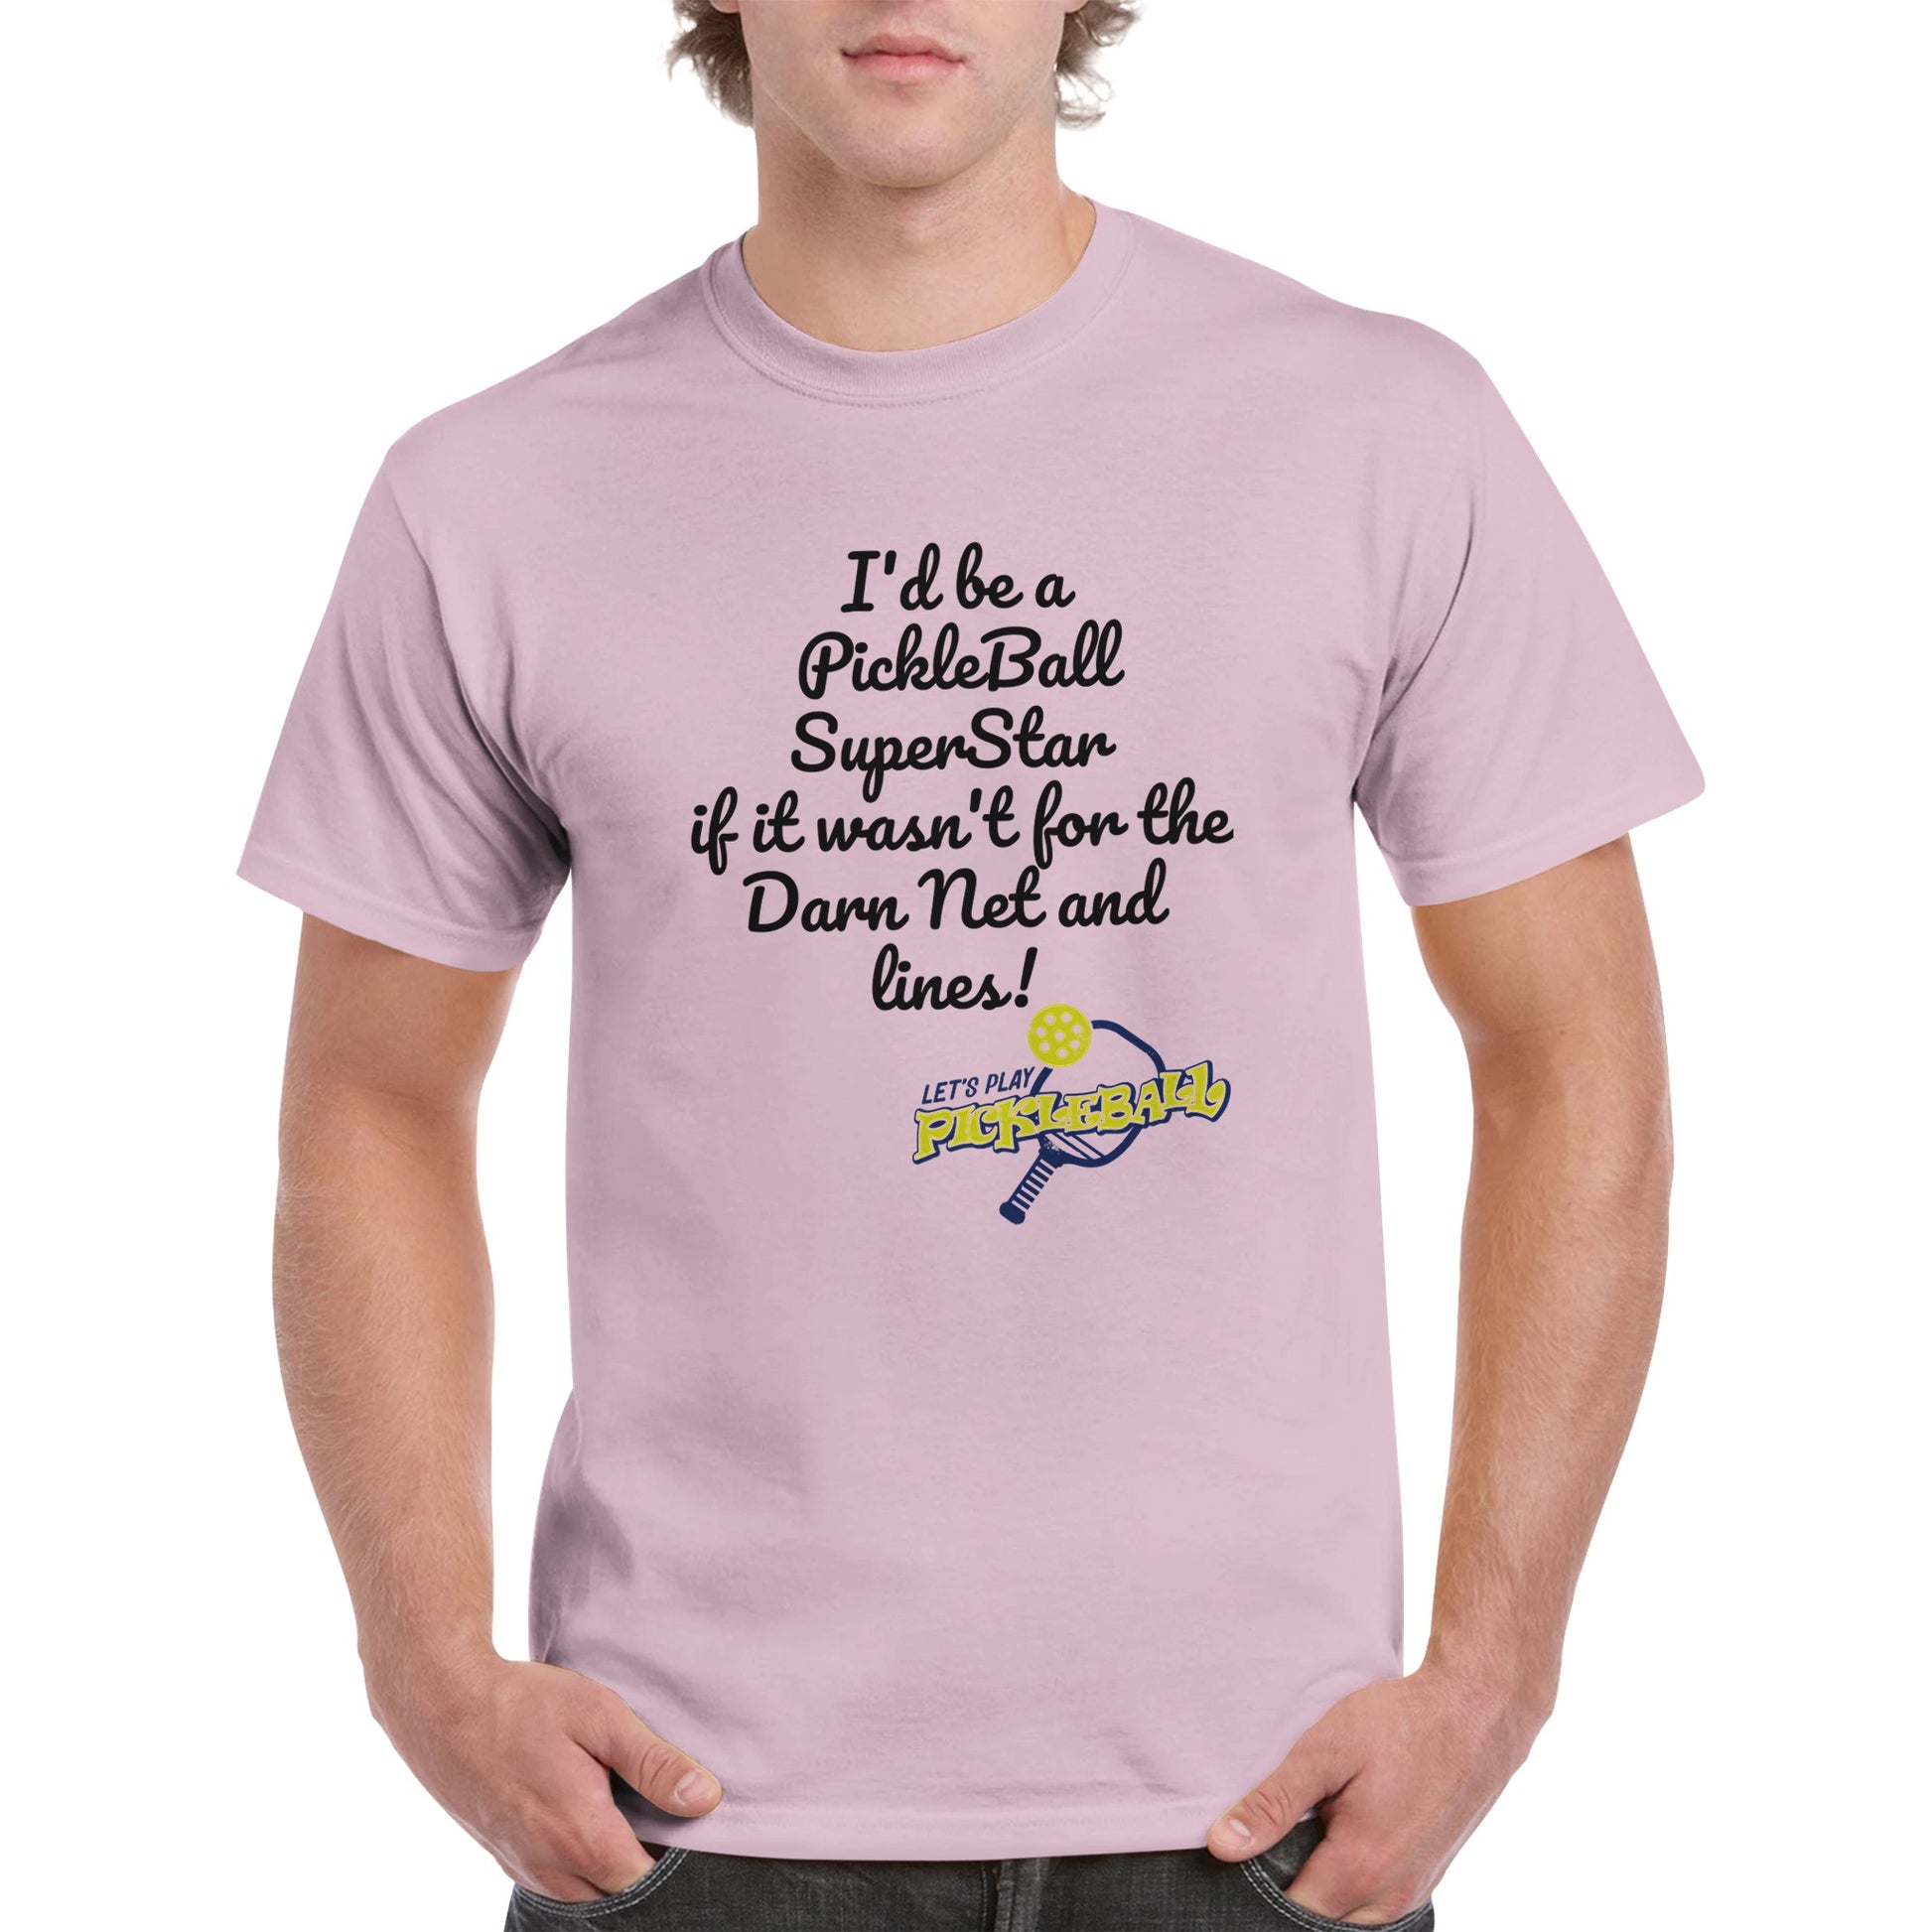 Light Pink comfortable Unisex Crewneck heavyweight cotton t-shirt with funny saying I’d be a PickleBall SuperStar if it wasn’t for the Darn Net and Lines and Let’s Play Pickleball logo on the front from WhatYa Say Apparel worn by blonde-haired male front view.